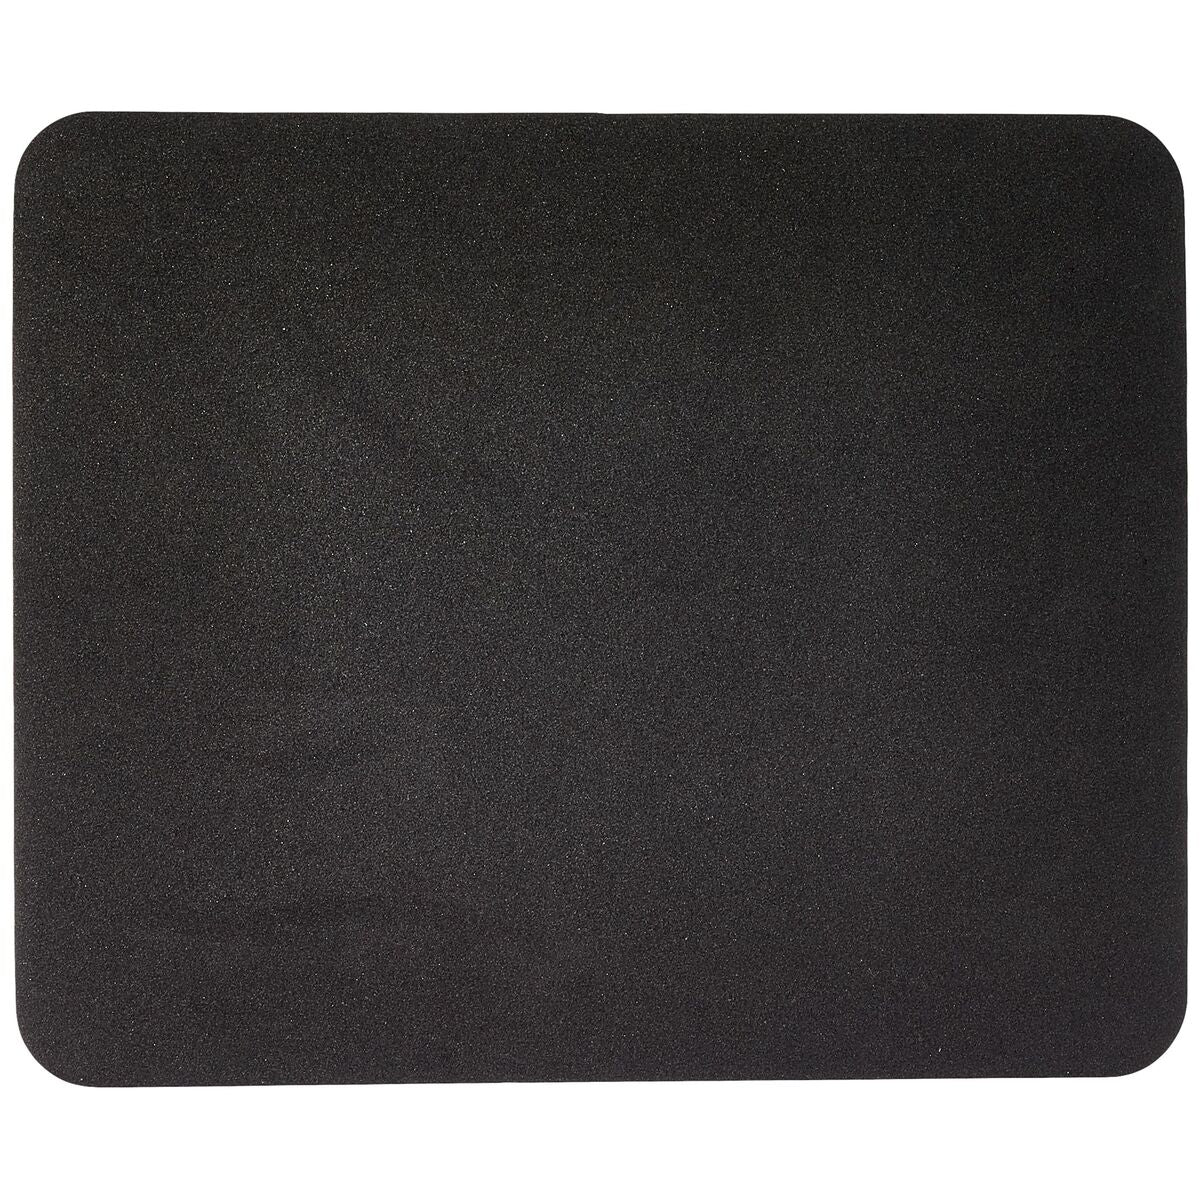 Non-slip Mat Fellowes 23 x 19 cm Red (Refurbished A)